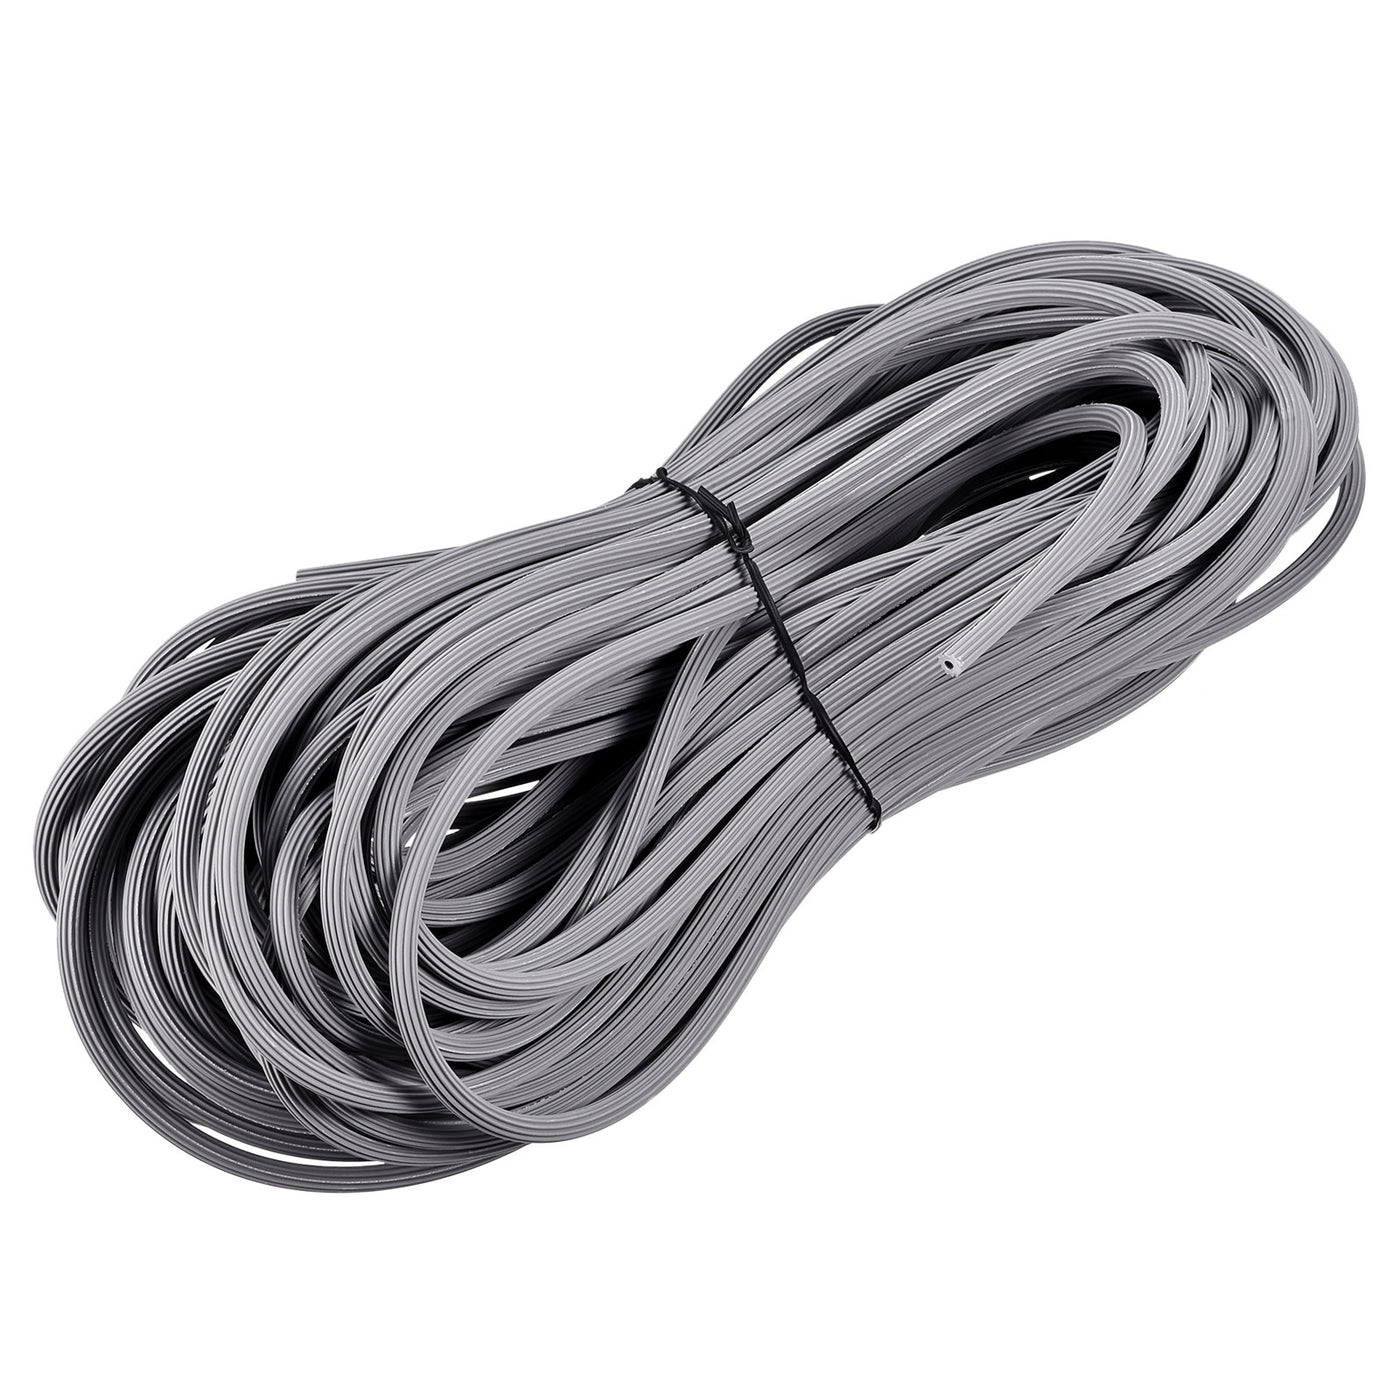 uxcell Uxcell Screen Spline 30M/98.43Ft Length PVC Sealing Strip Retainer, 5.5mm OD Gray